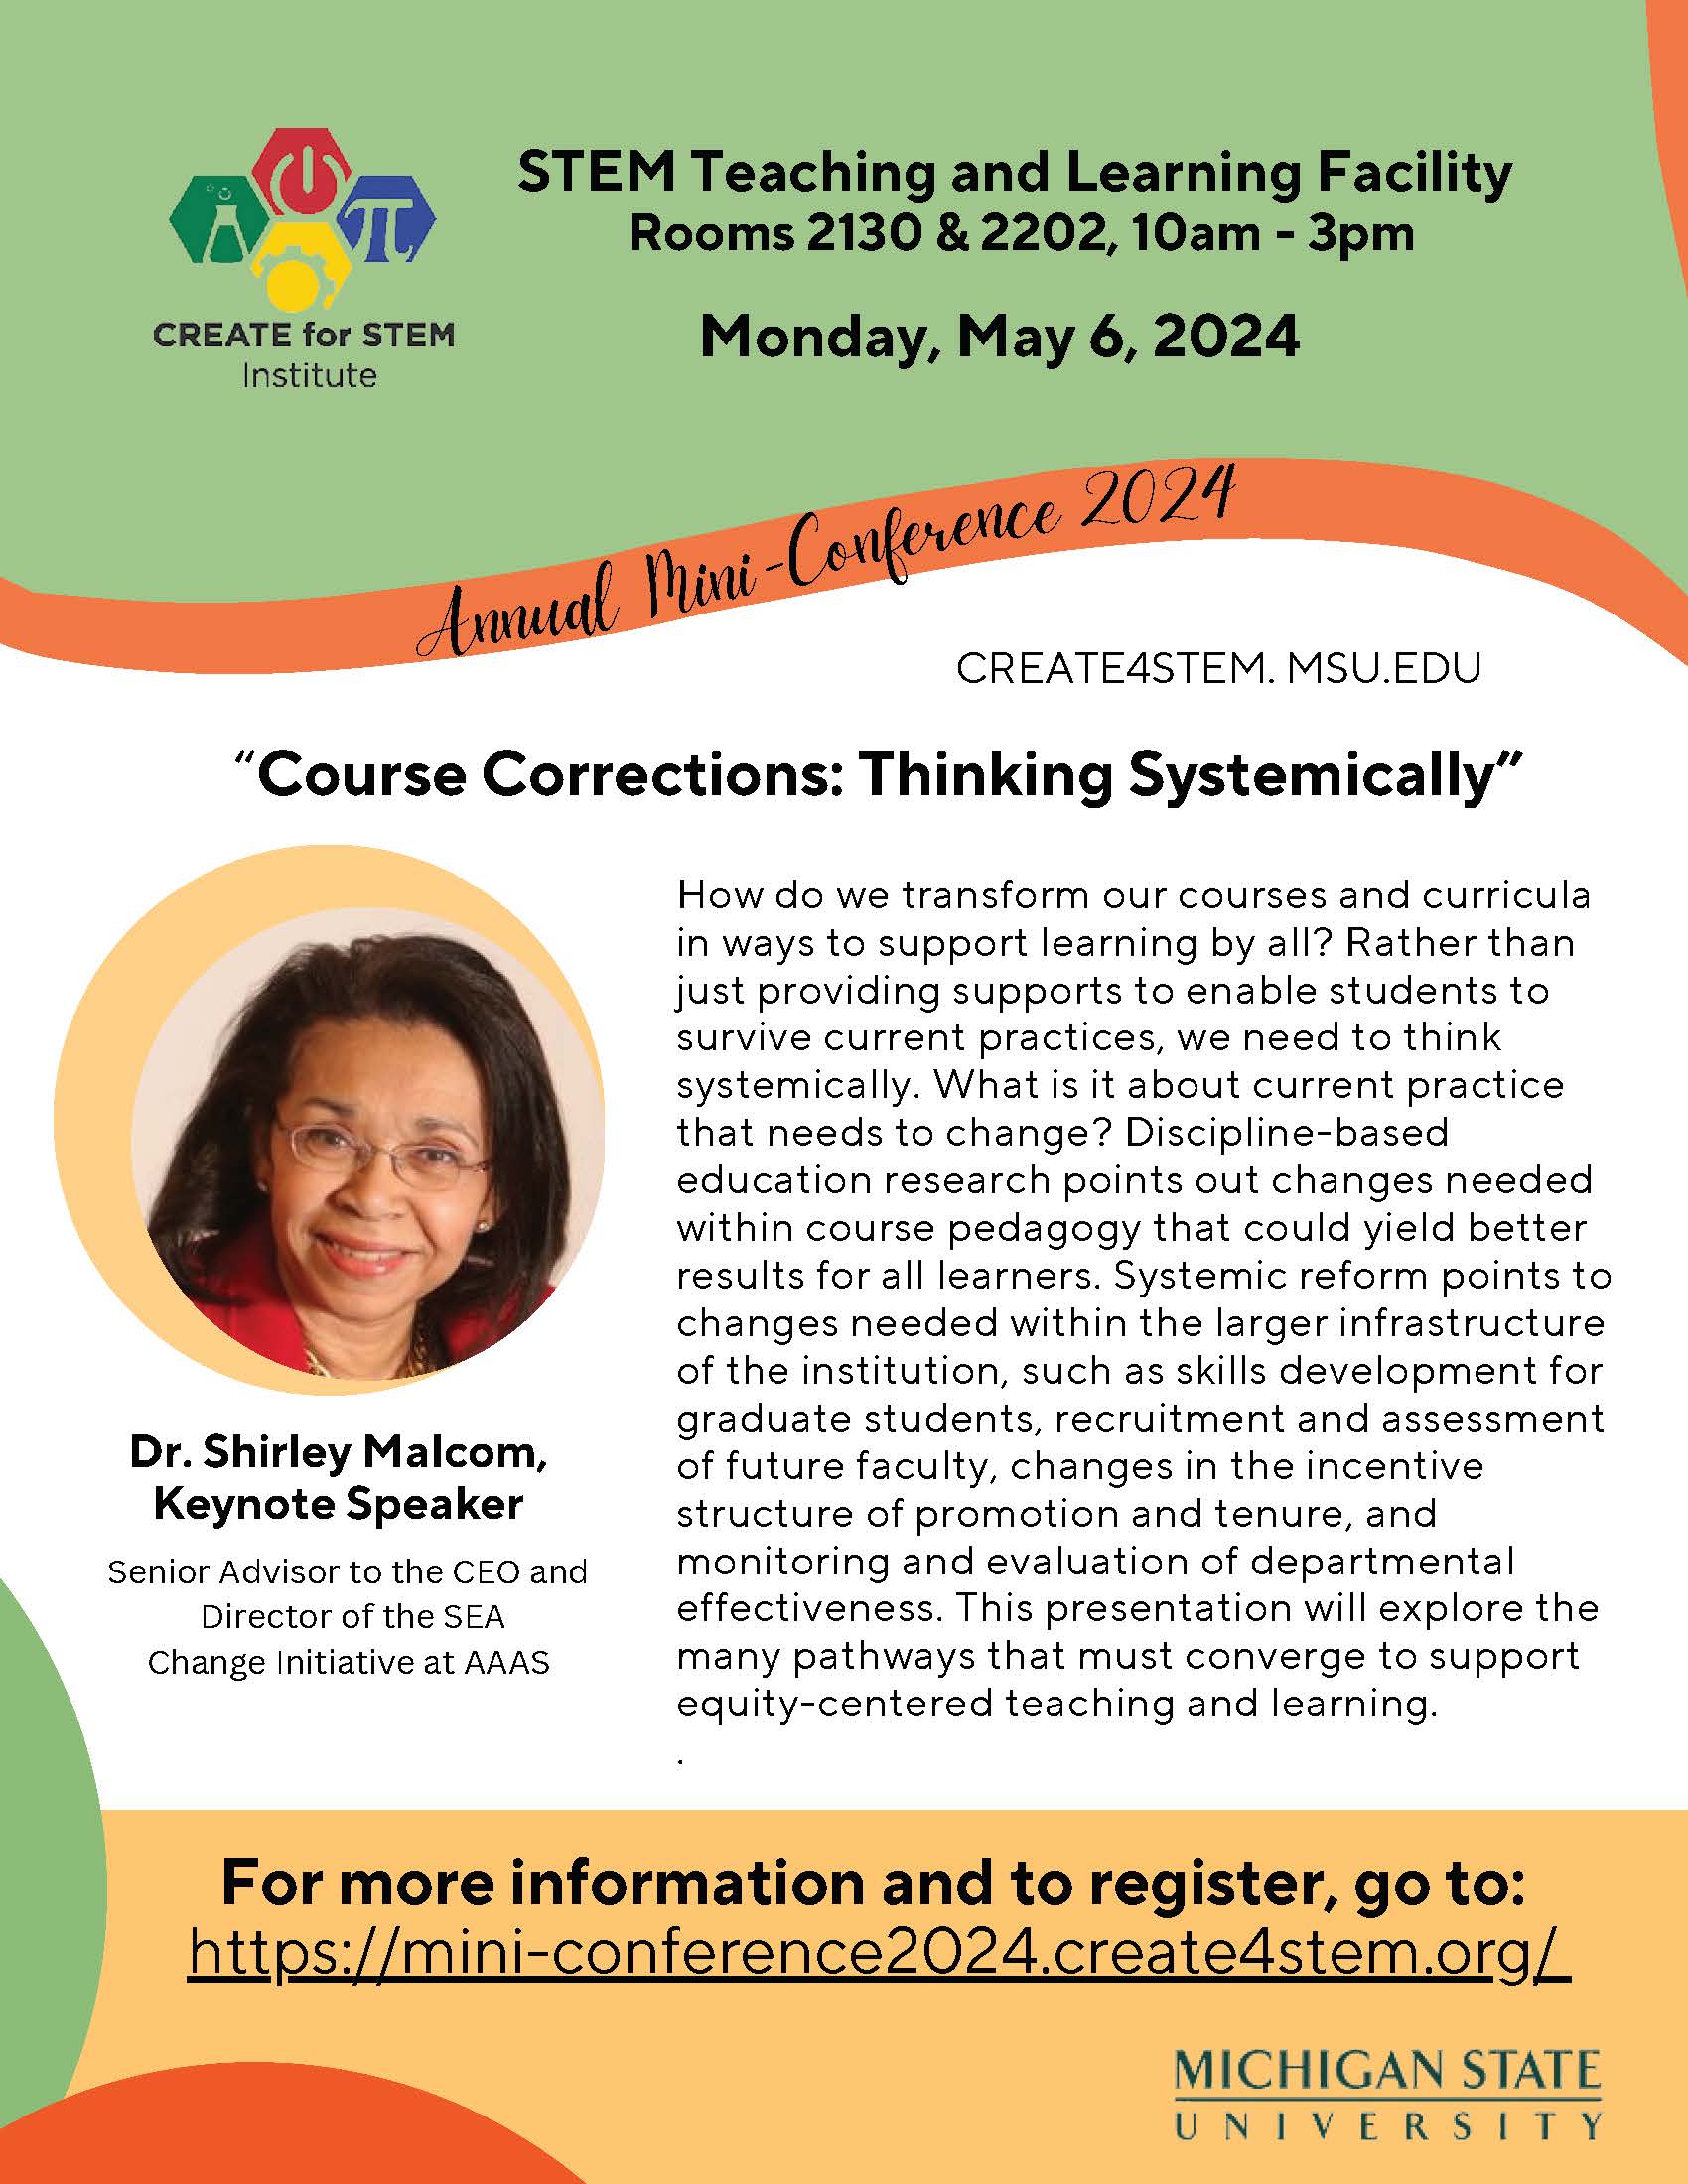 2024 CREATE for STEM Mini-Conference. Dr. Shirley Malcom will be the Keynote Speaker.